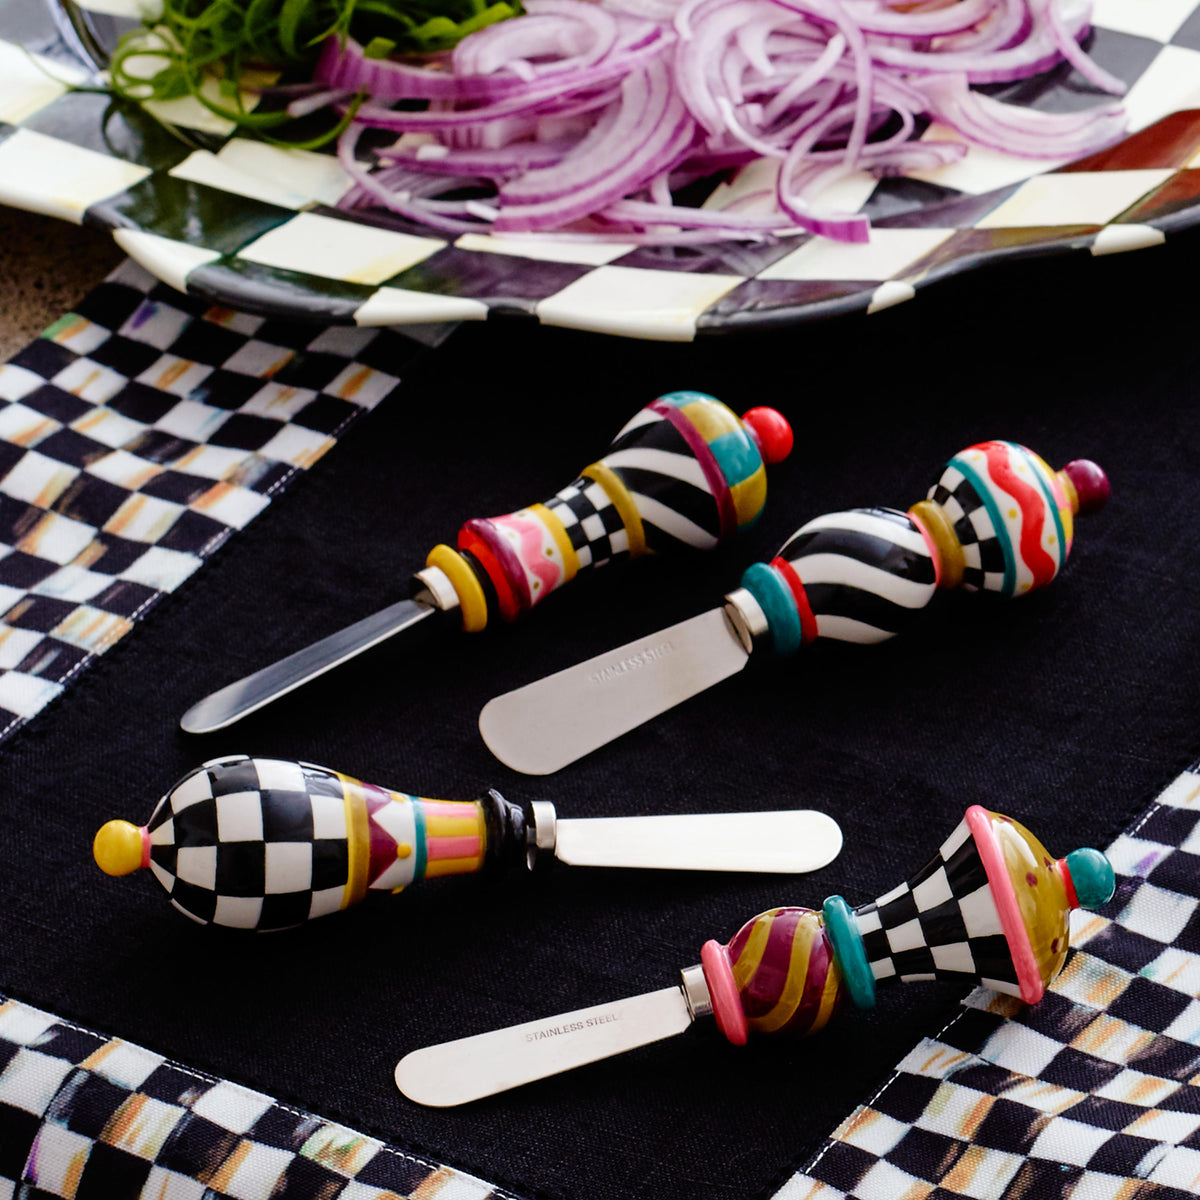 Jubilee Canape Knives - Set of 4